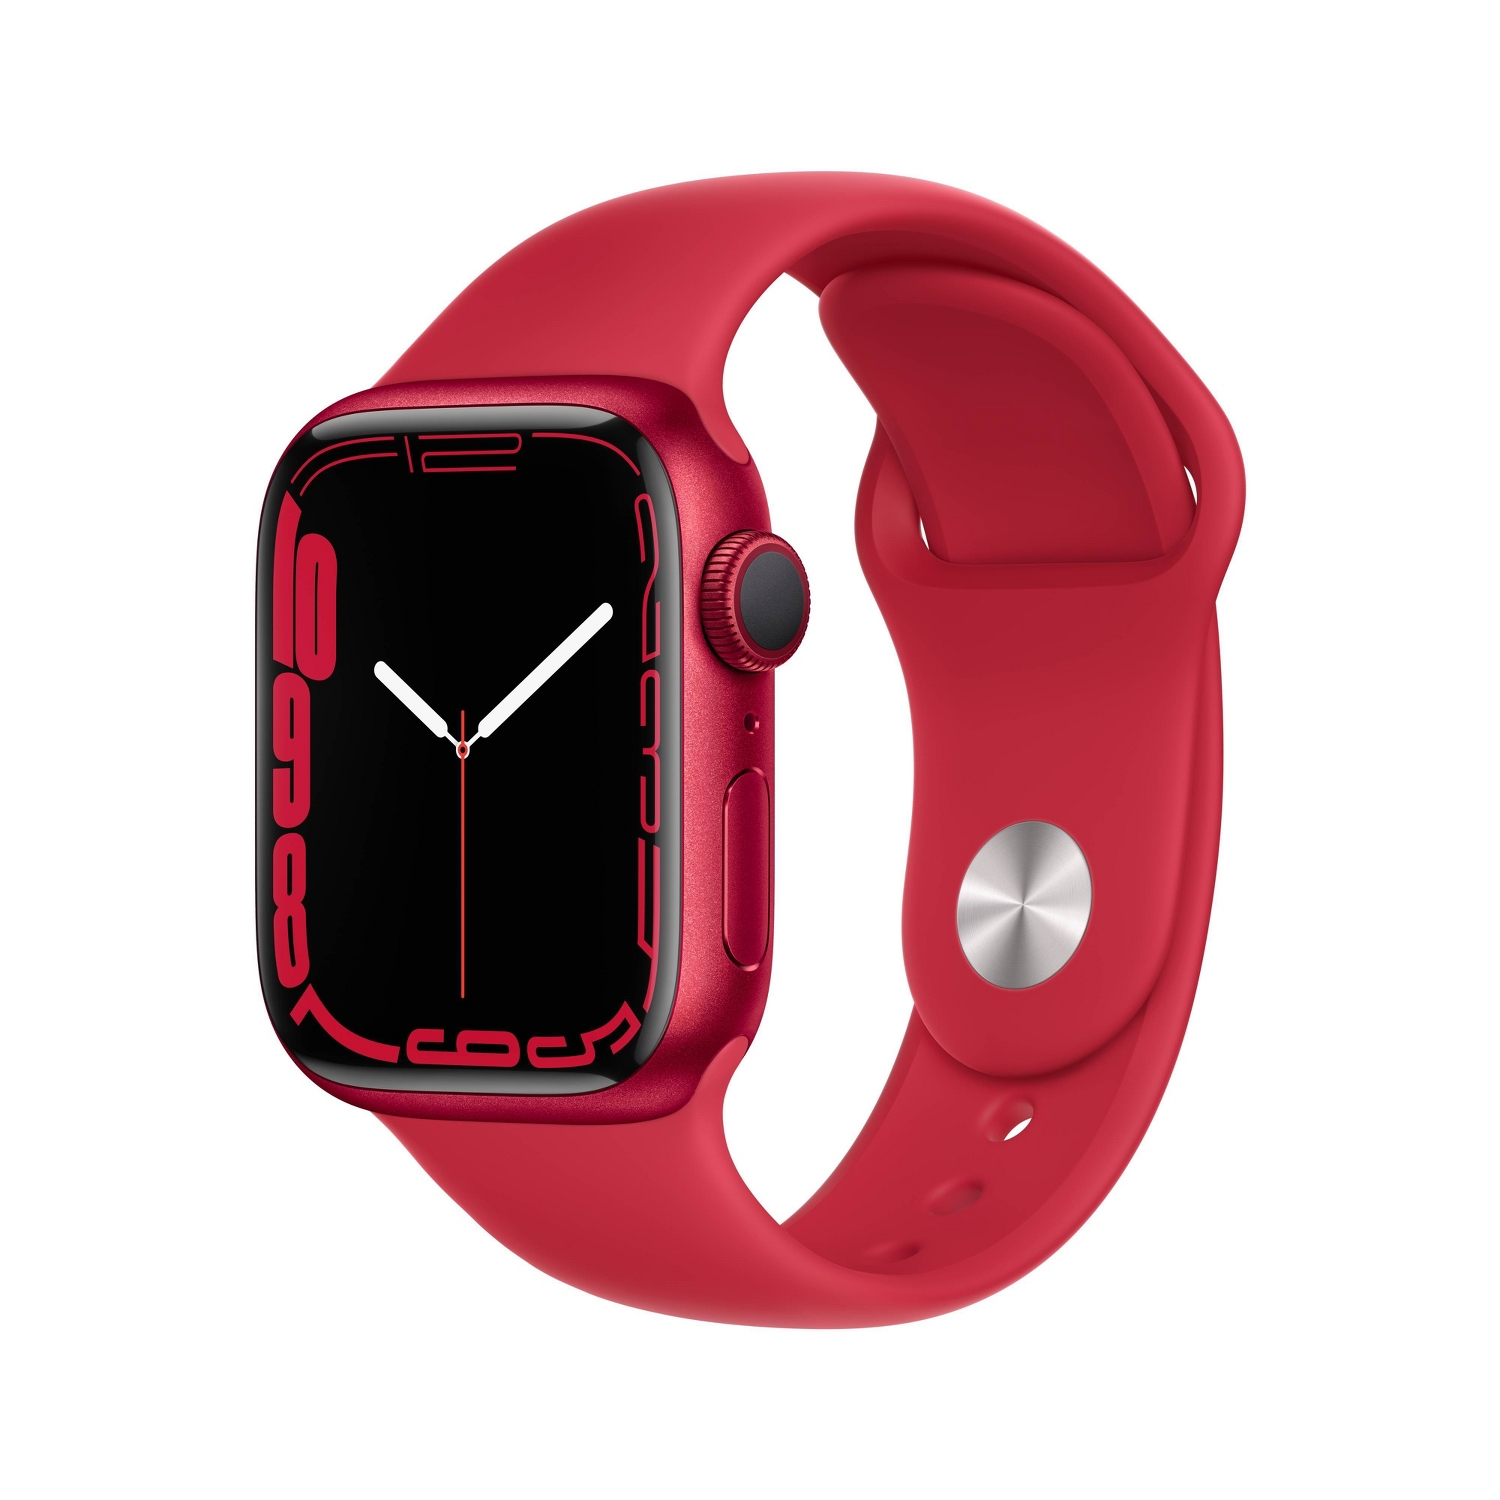 Apple Watch Series 7 GPS, 41mm (All Colors) $299 at Target